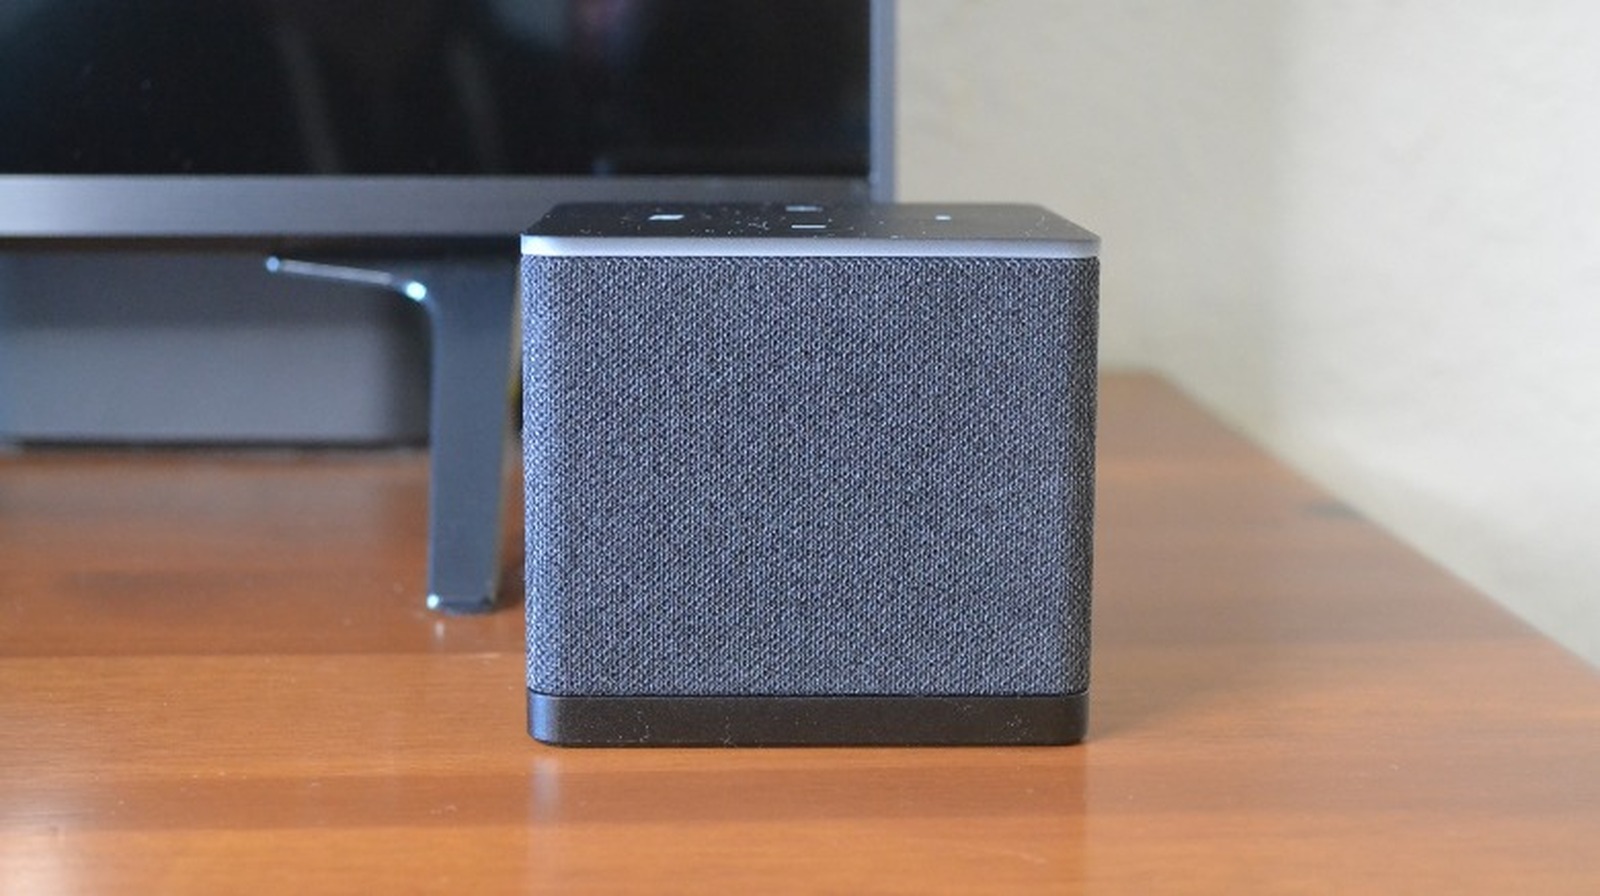 How to Set up a Fire TV Cube